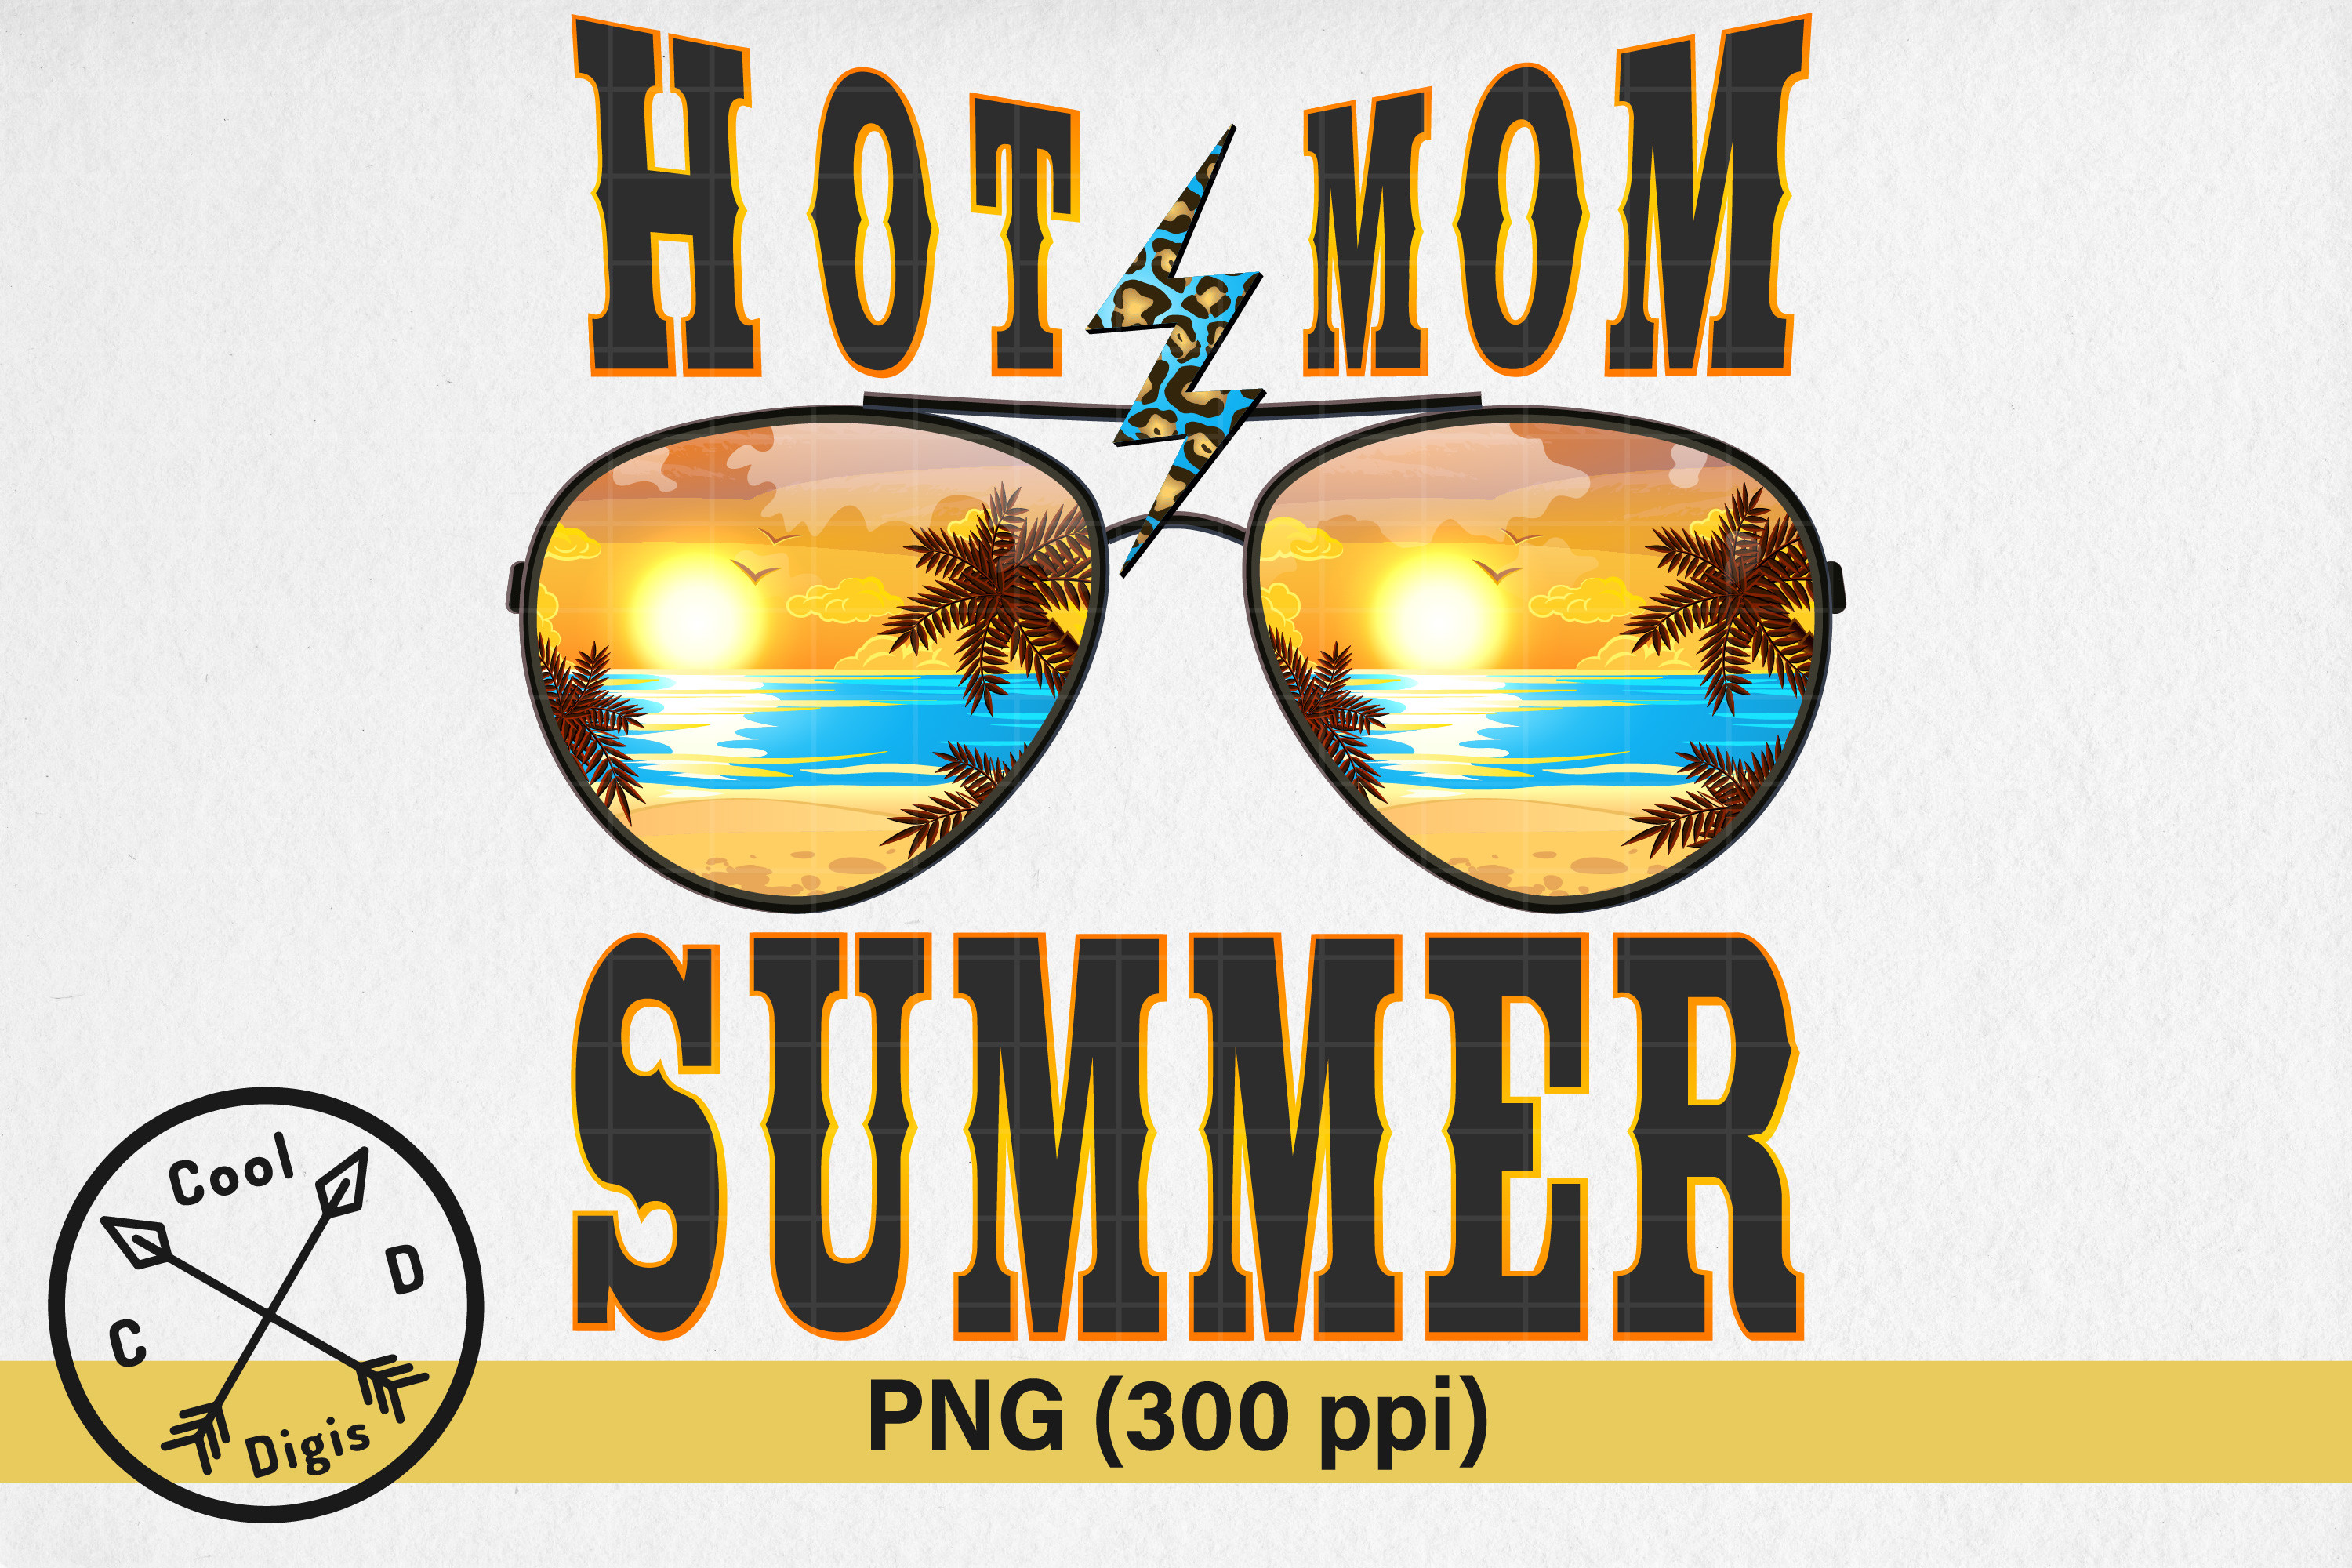 Hot Mom Summer Sublimation Shirt Design Graphic by Cool Digis ...